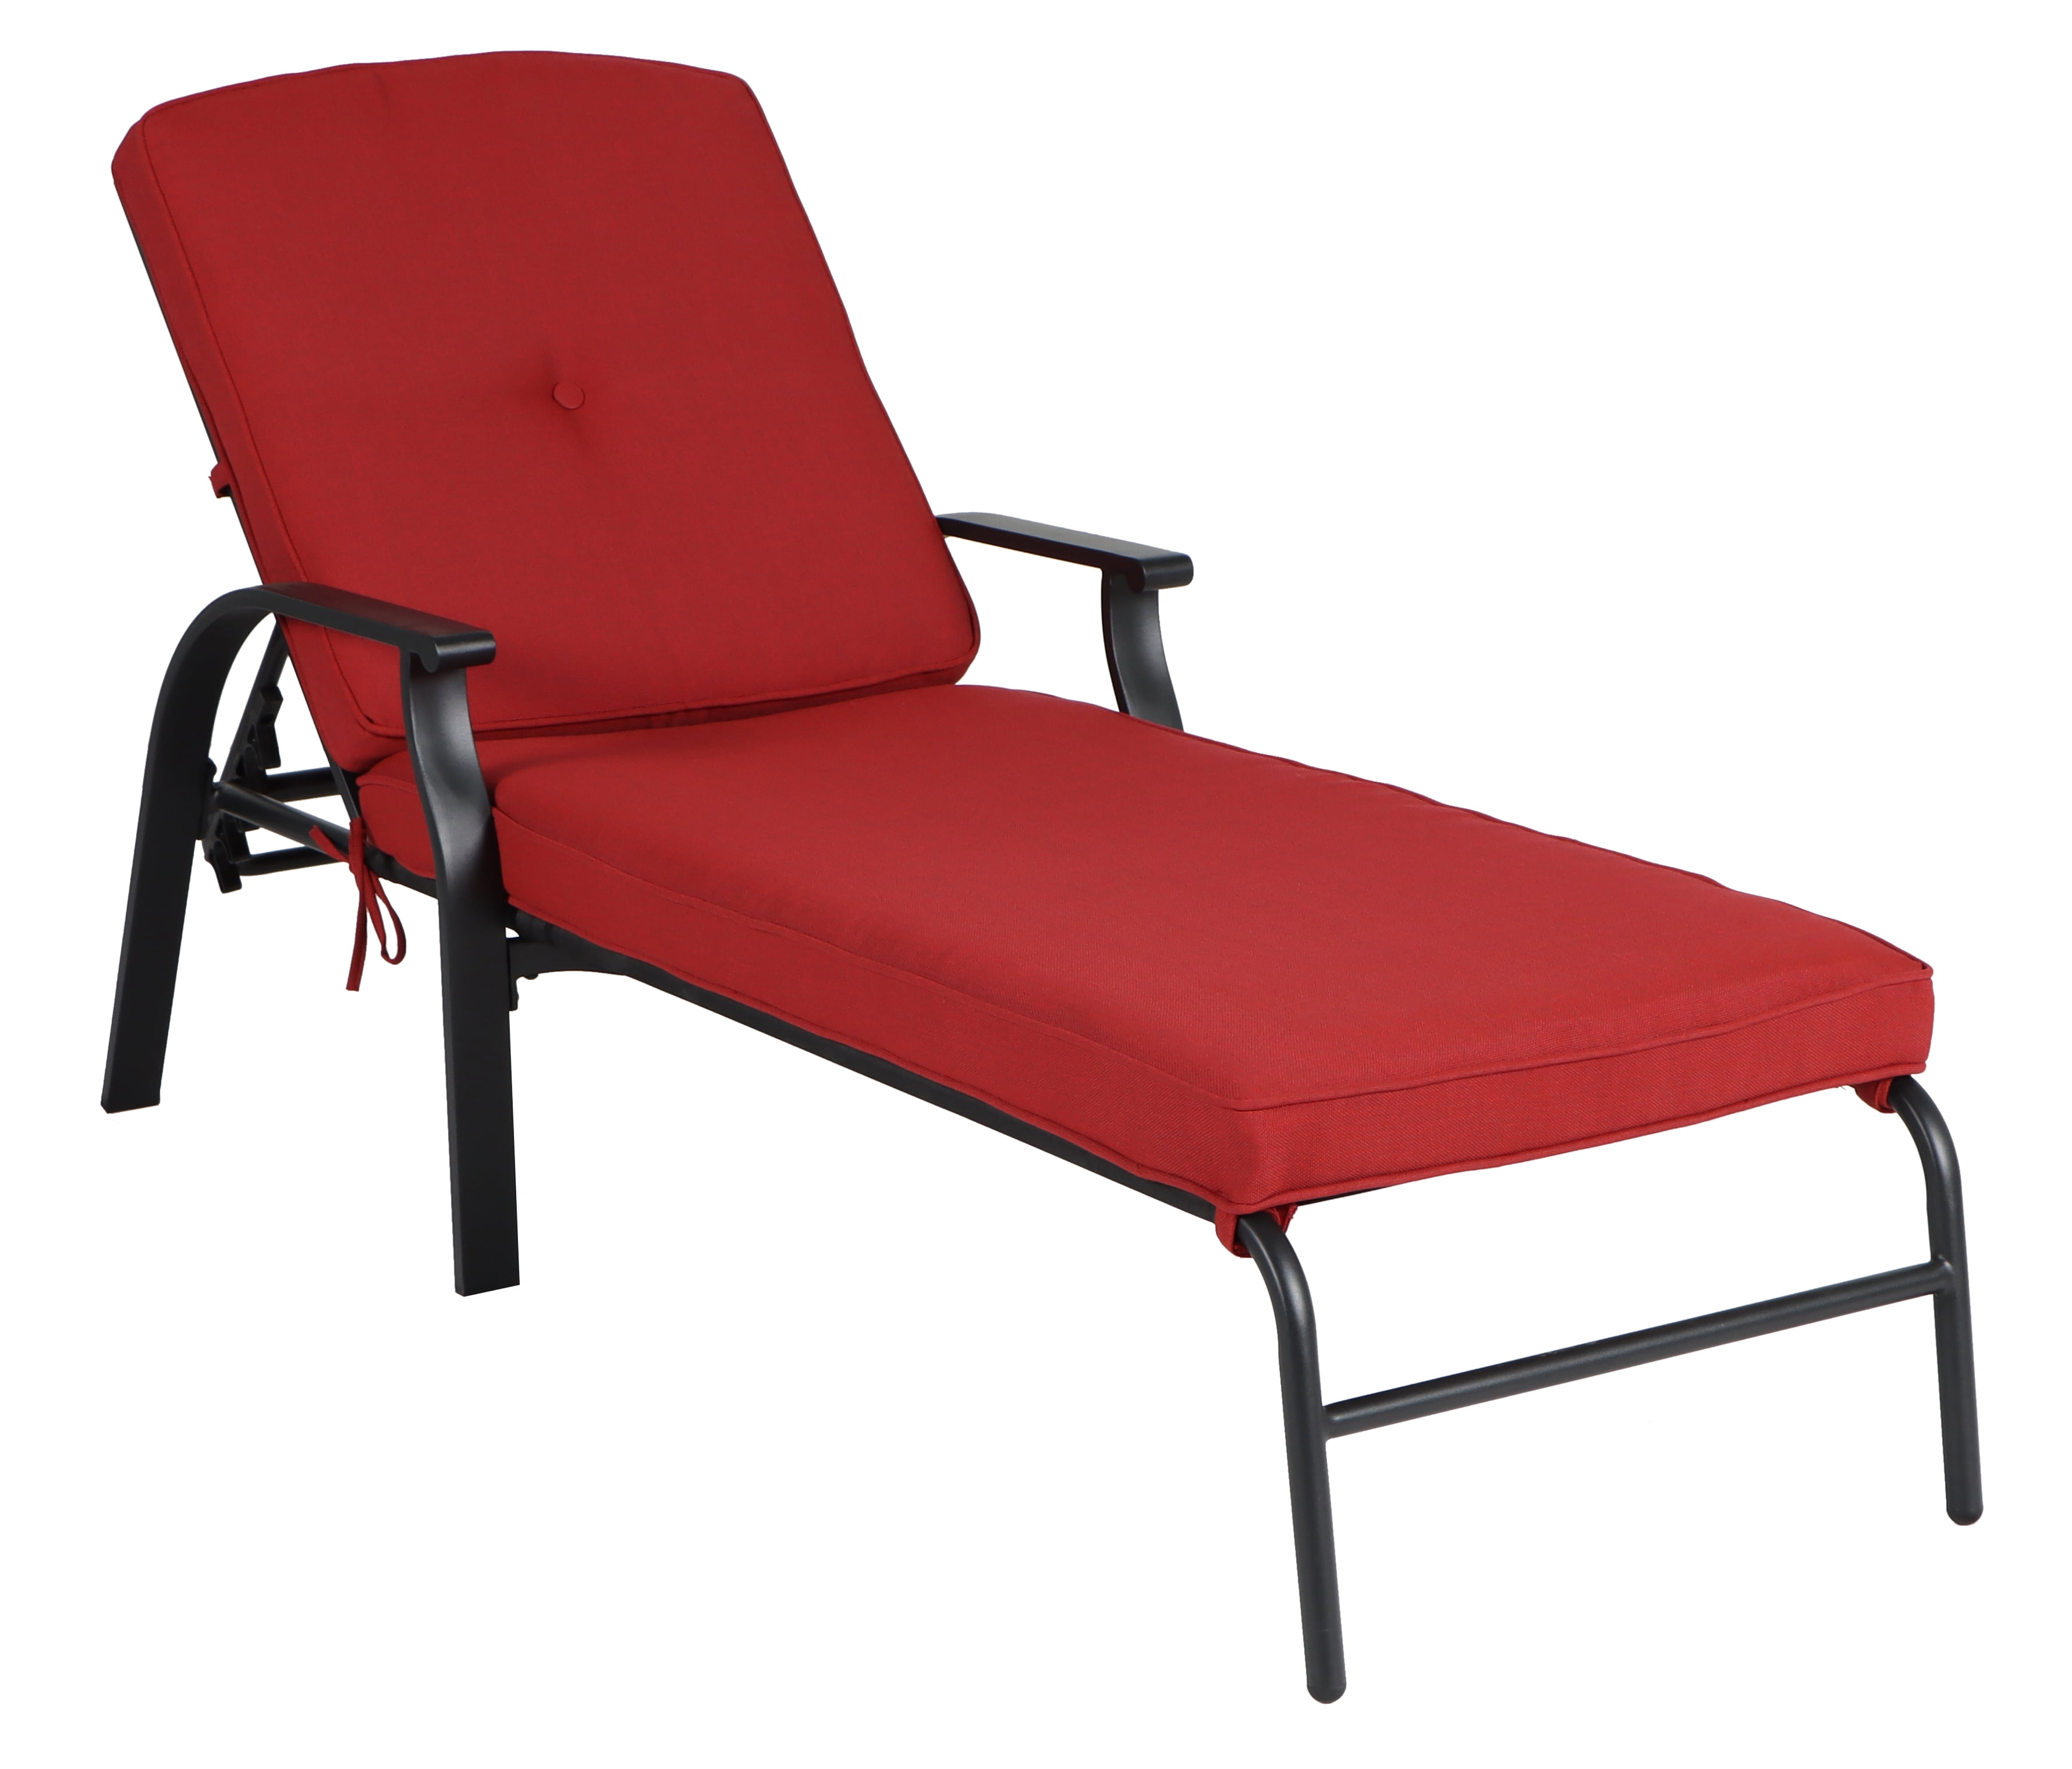 Outdoor Chaise Lounge Chair Cushion Red Yellow Patio Recliner Lounger Padding 